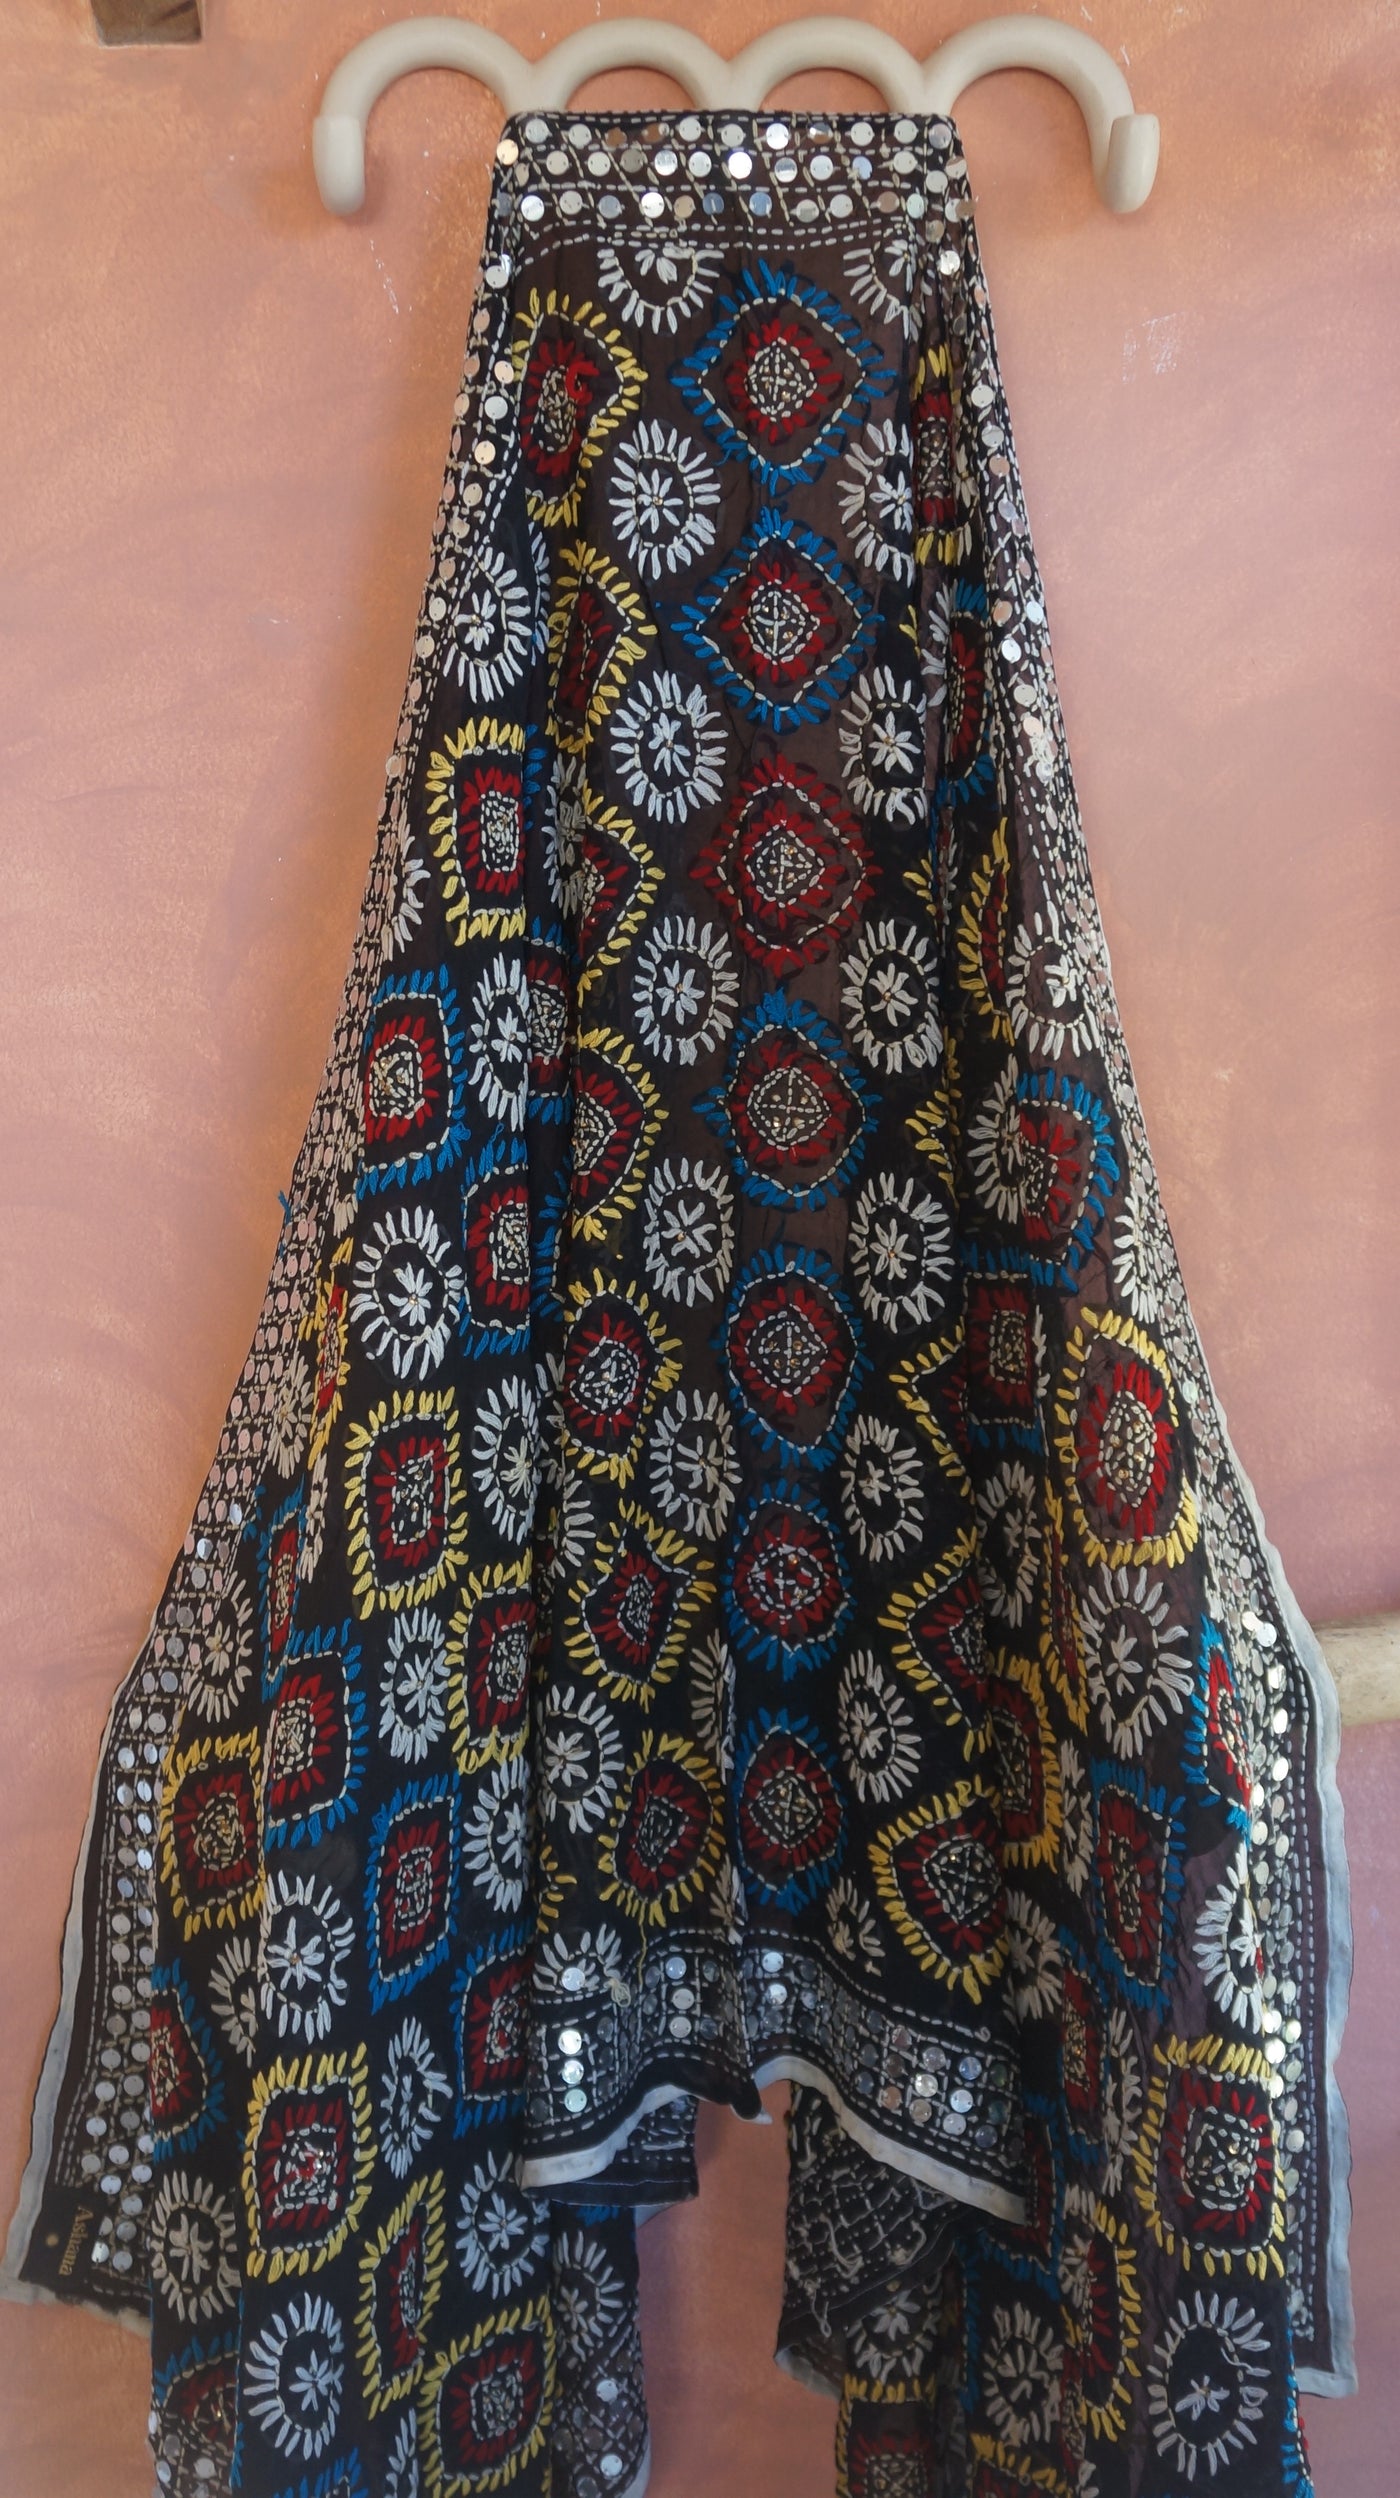 Embroidered Pareo - Black, Yellow & Blue patterns (AP136)